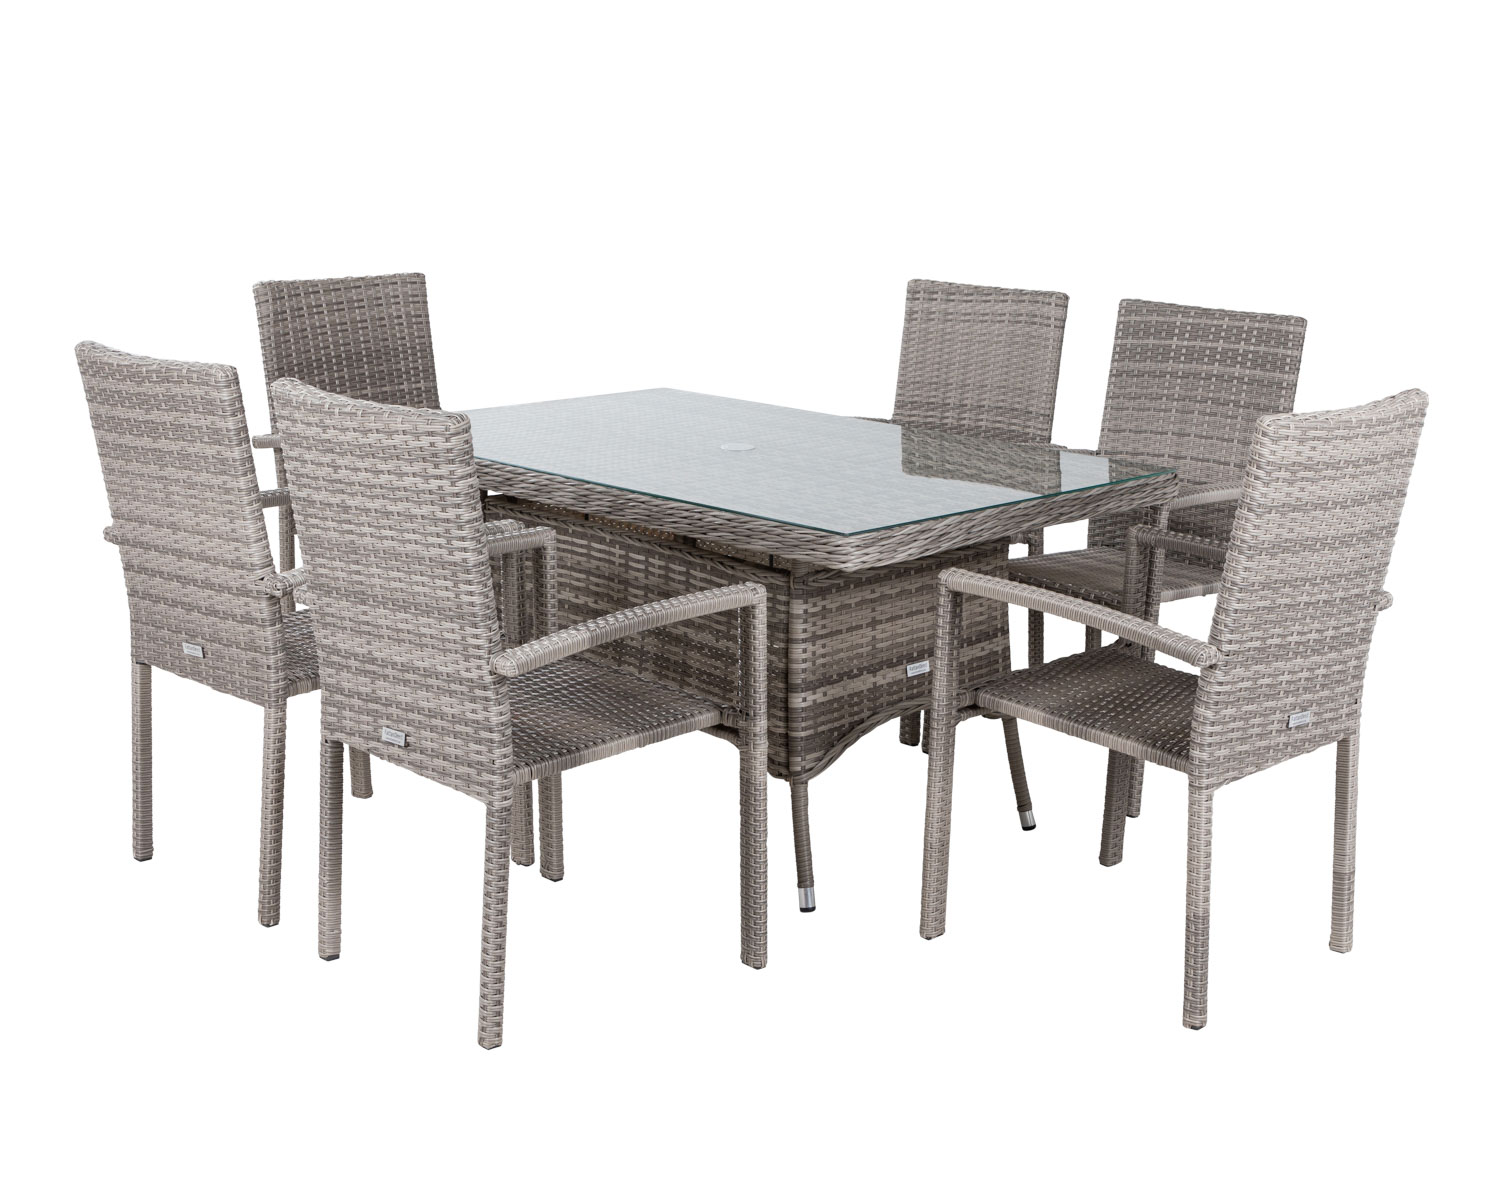 6 Seat Rattan Garden Dining Set With Small Rectangular Table In Grey Rio Rattan Direct